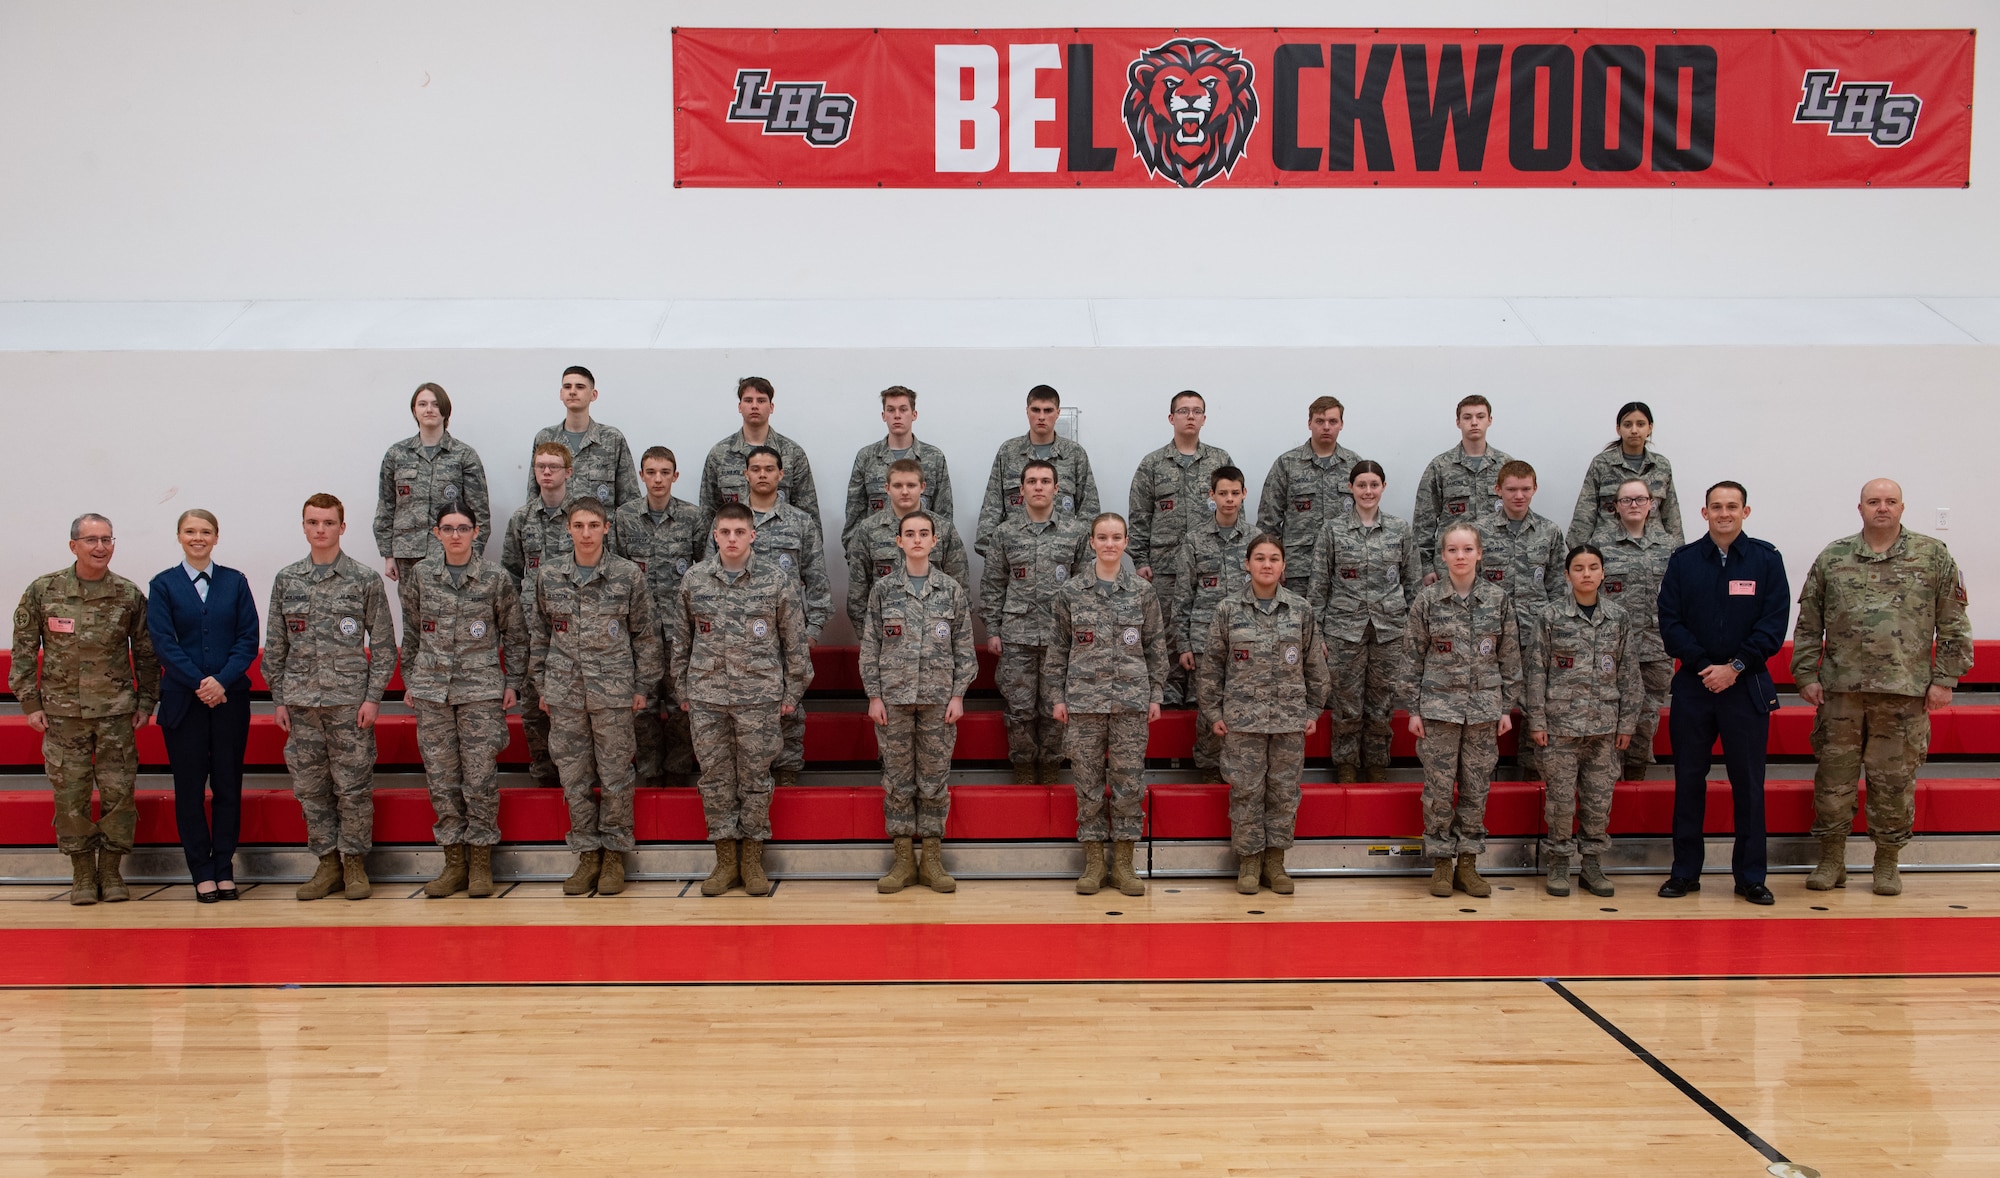 Members of the Lockwood High School Air Force Junior Reserve Officer Training Corps, Air Force Recruiting Service and Montana Air National Guard pose for a group photo at Lockwood High School, Billings, Montana, April 14, 2023